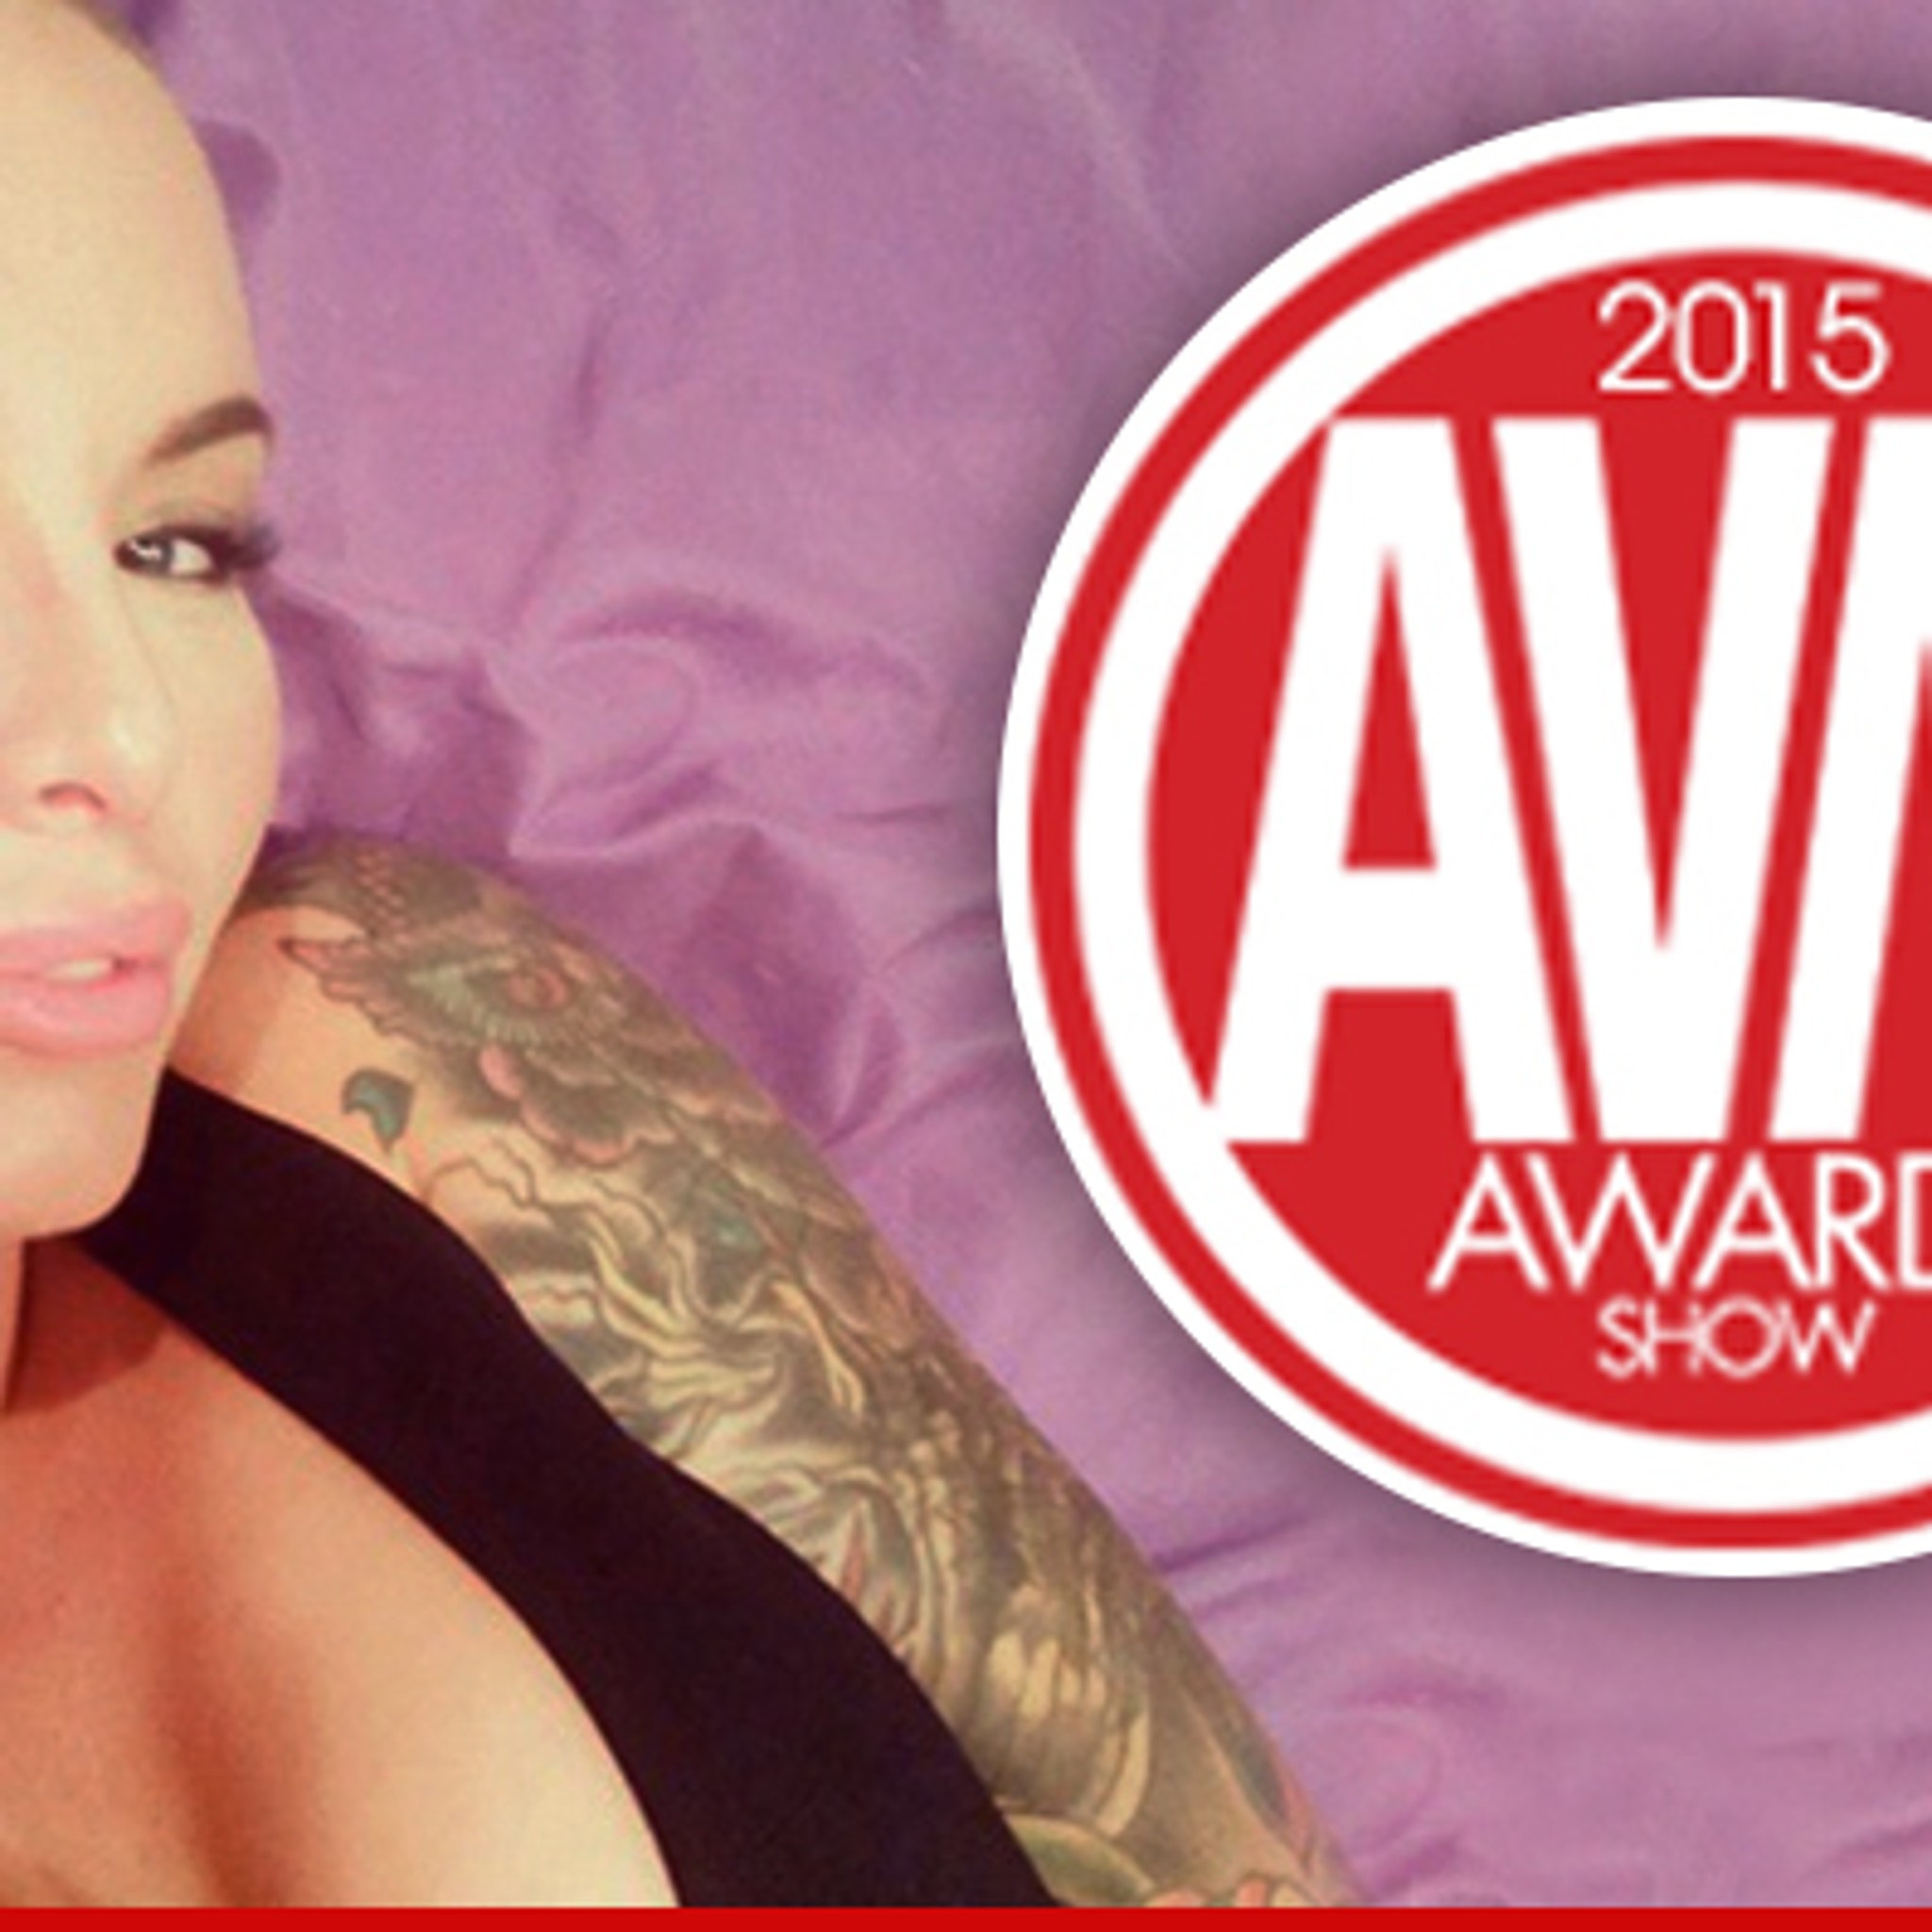 2015 New Christy Mack Porn - Christy Mack -- Doing AVN Party ... But Not For the Porn Of It